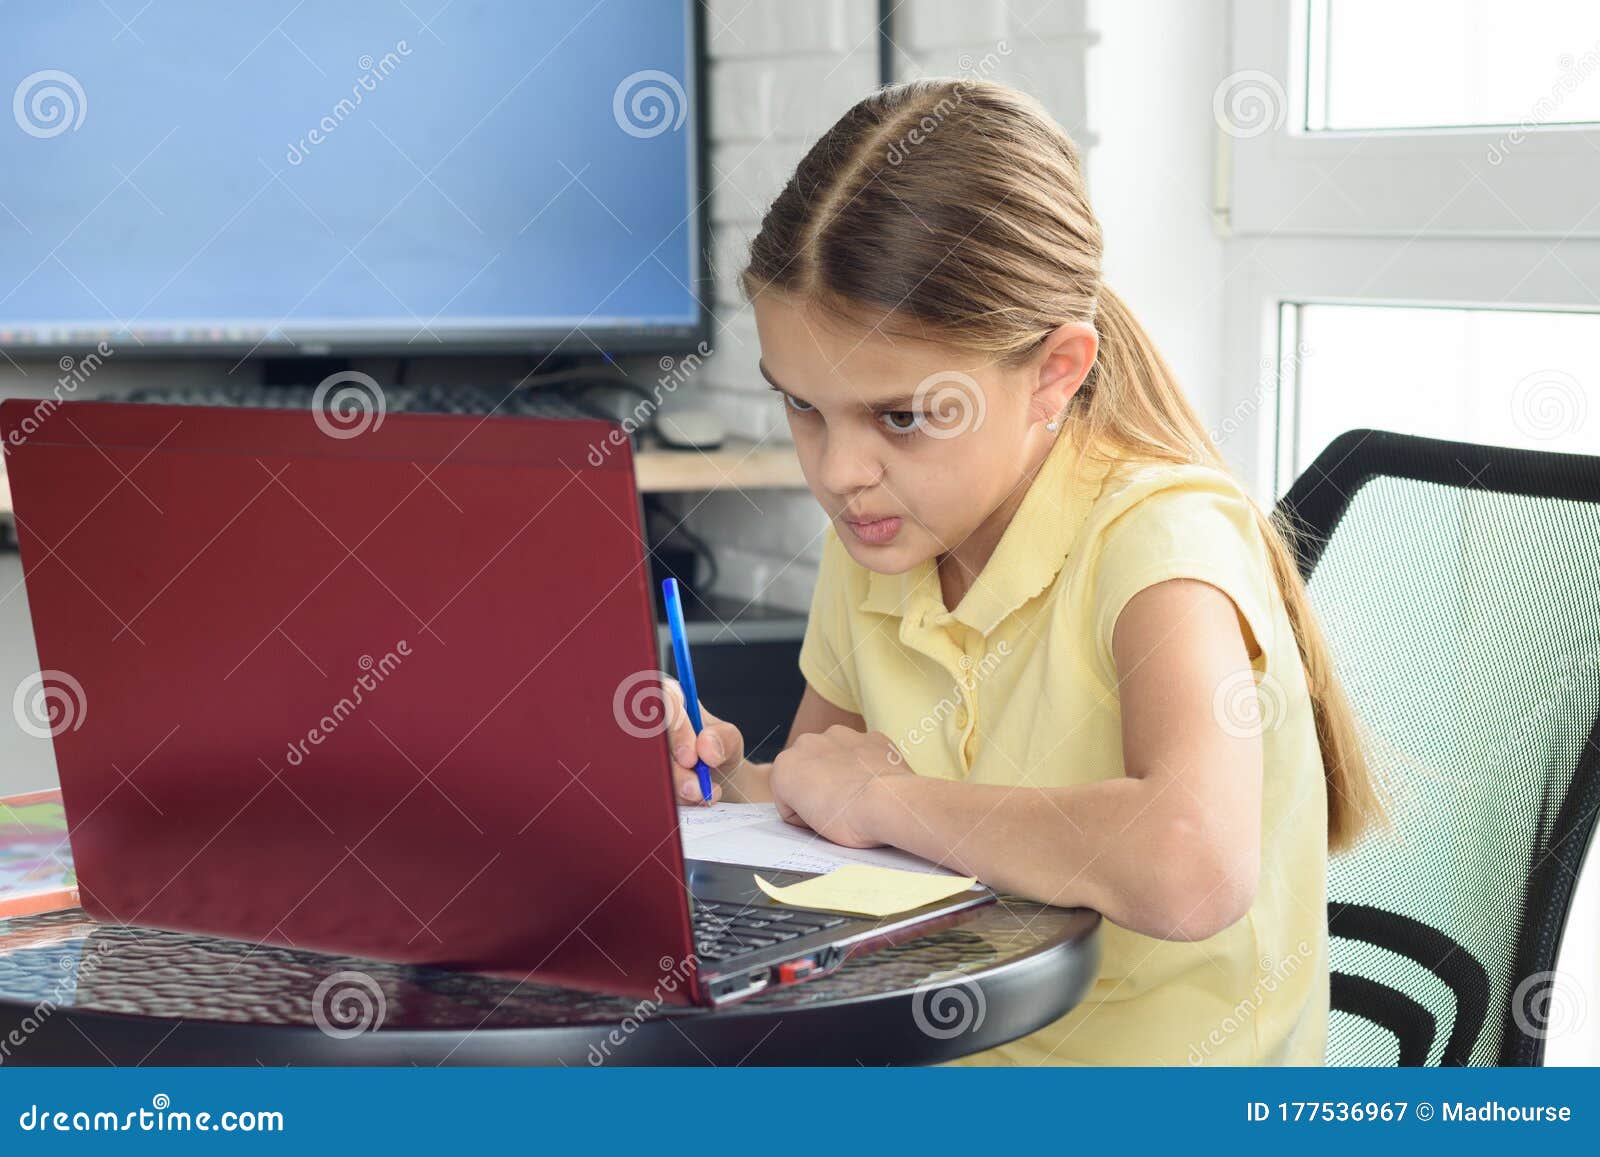 the girl is engaged in additional tutoring online